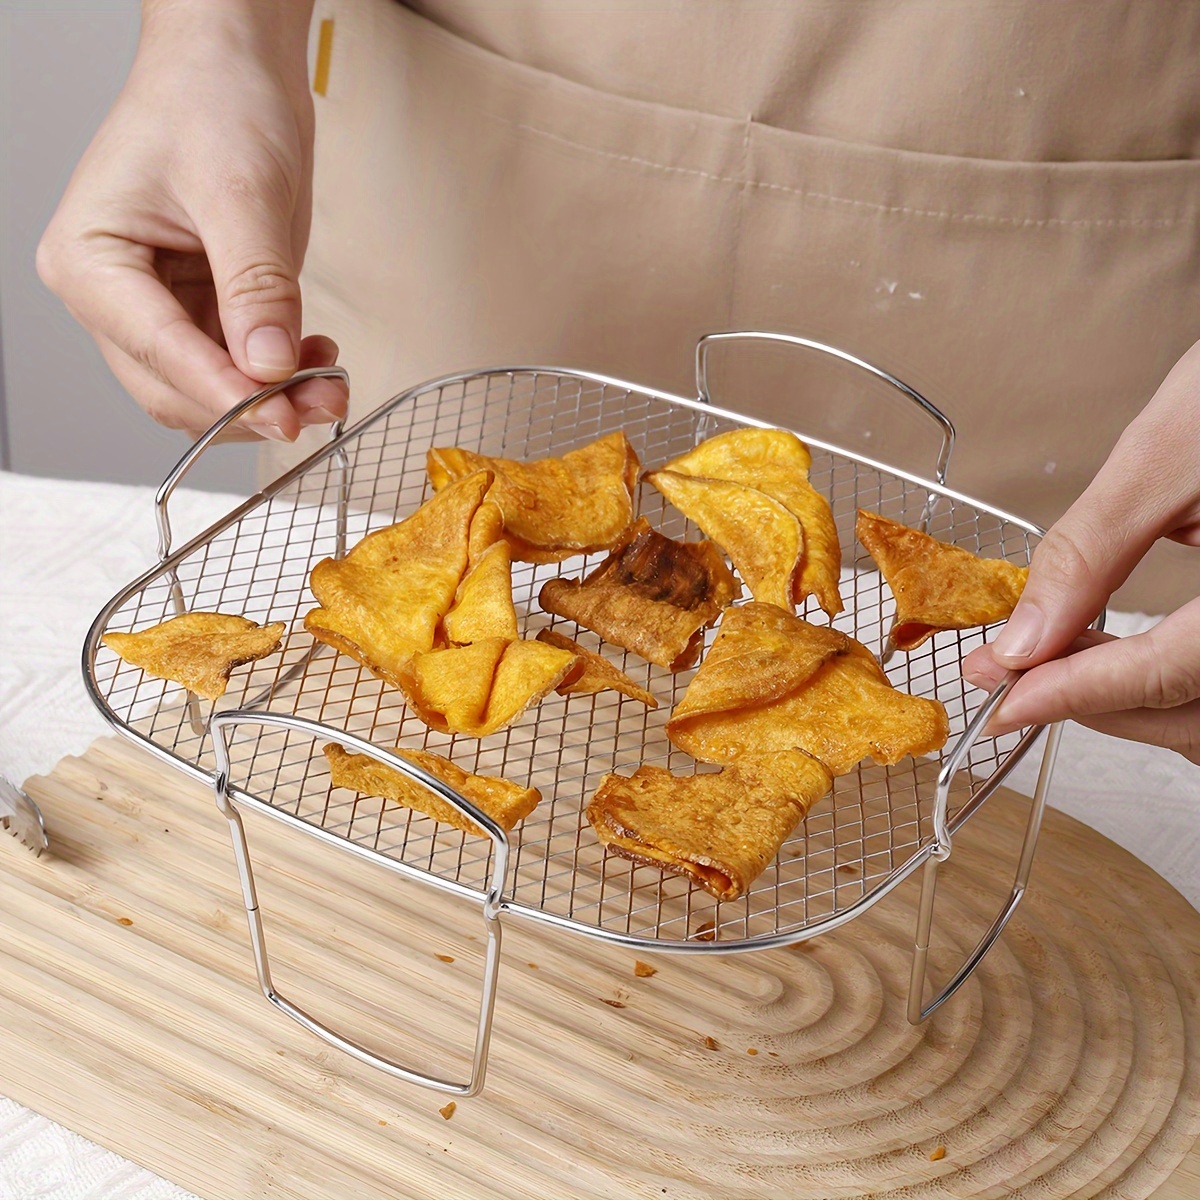 Air Fryer Accessories Square